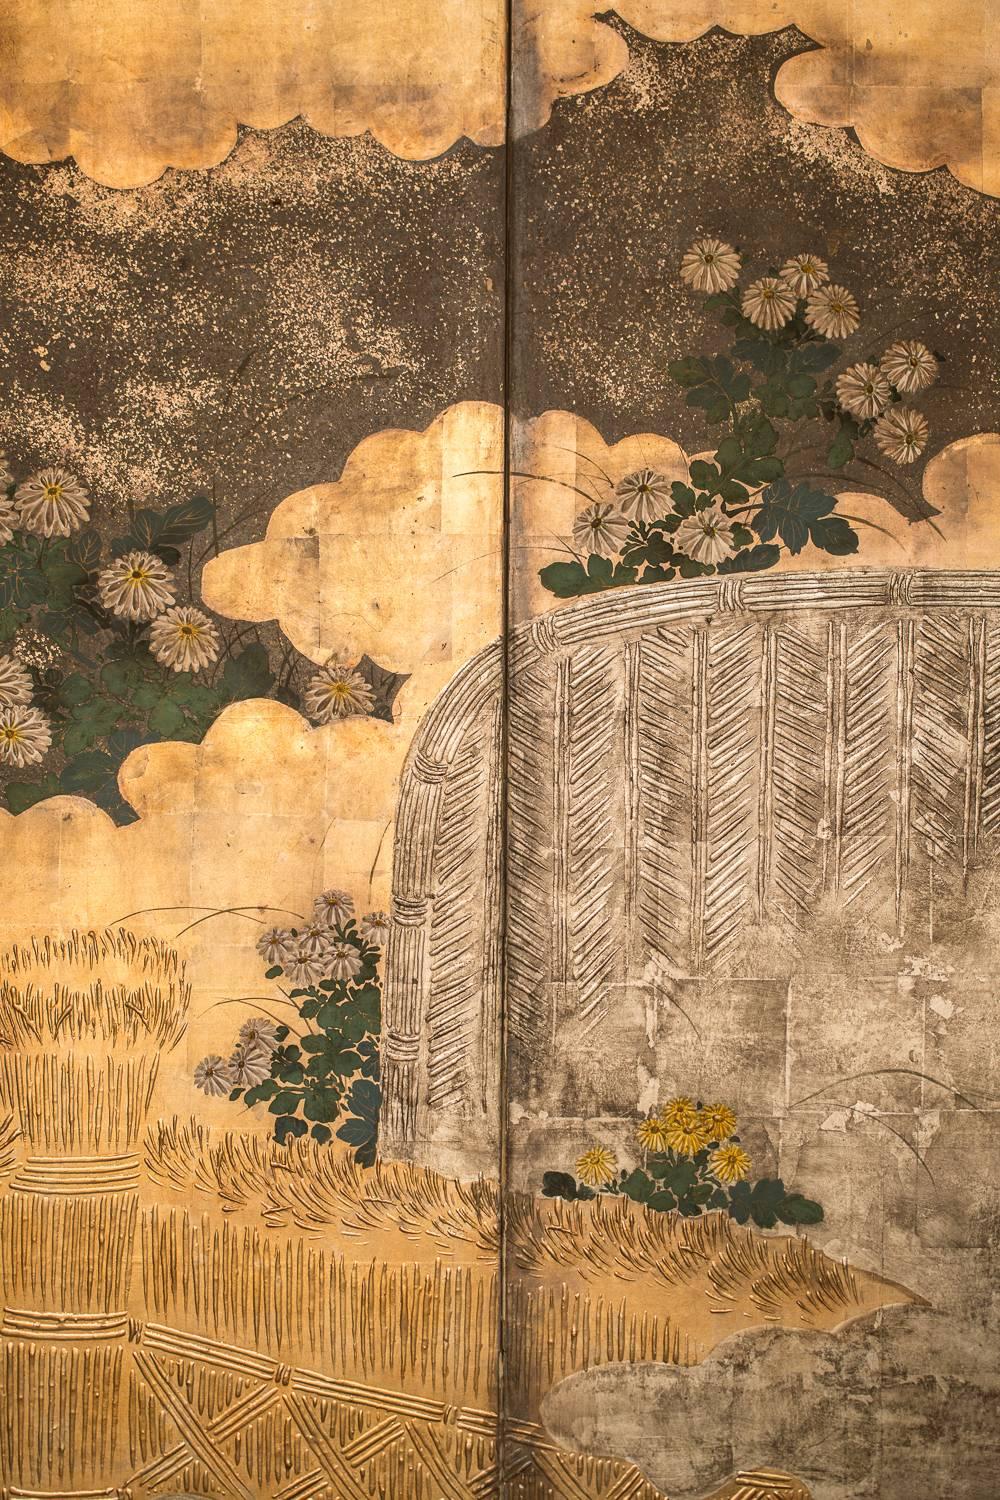 Hand-Painted Japanese Six-Panel Screen, “Rimpa School Chrysanthemums on Silver and Gold”